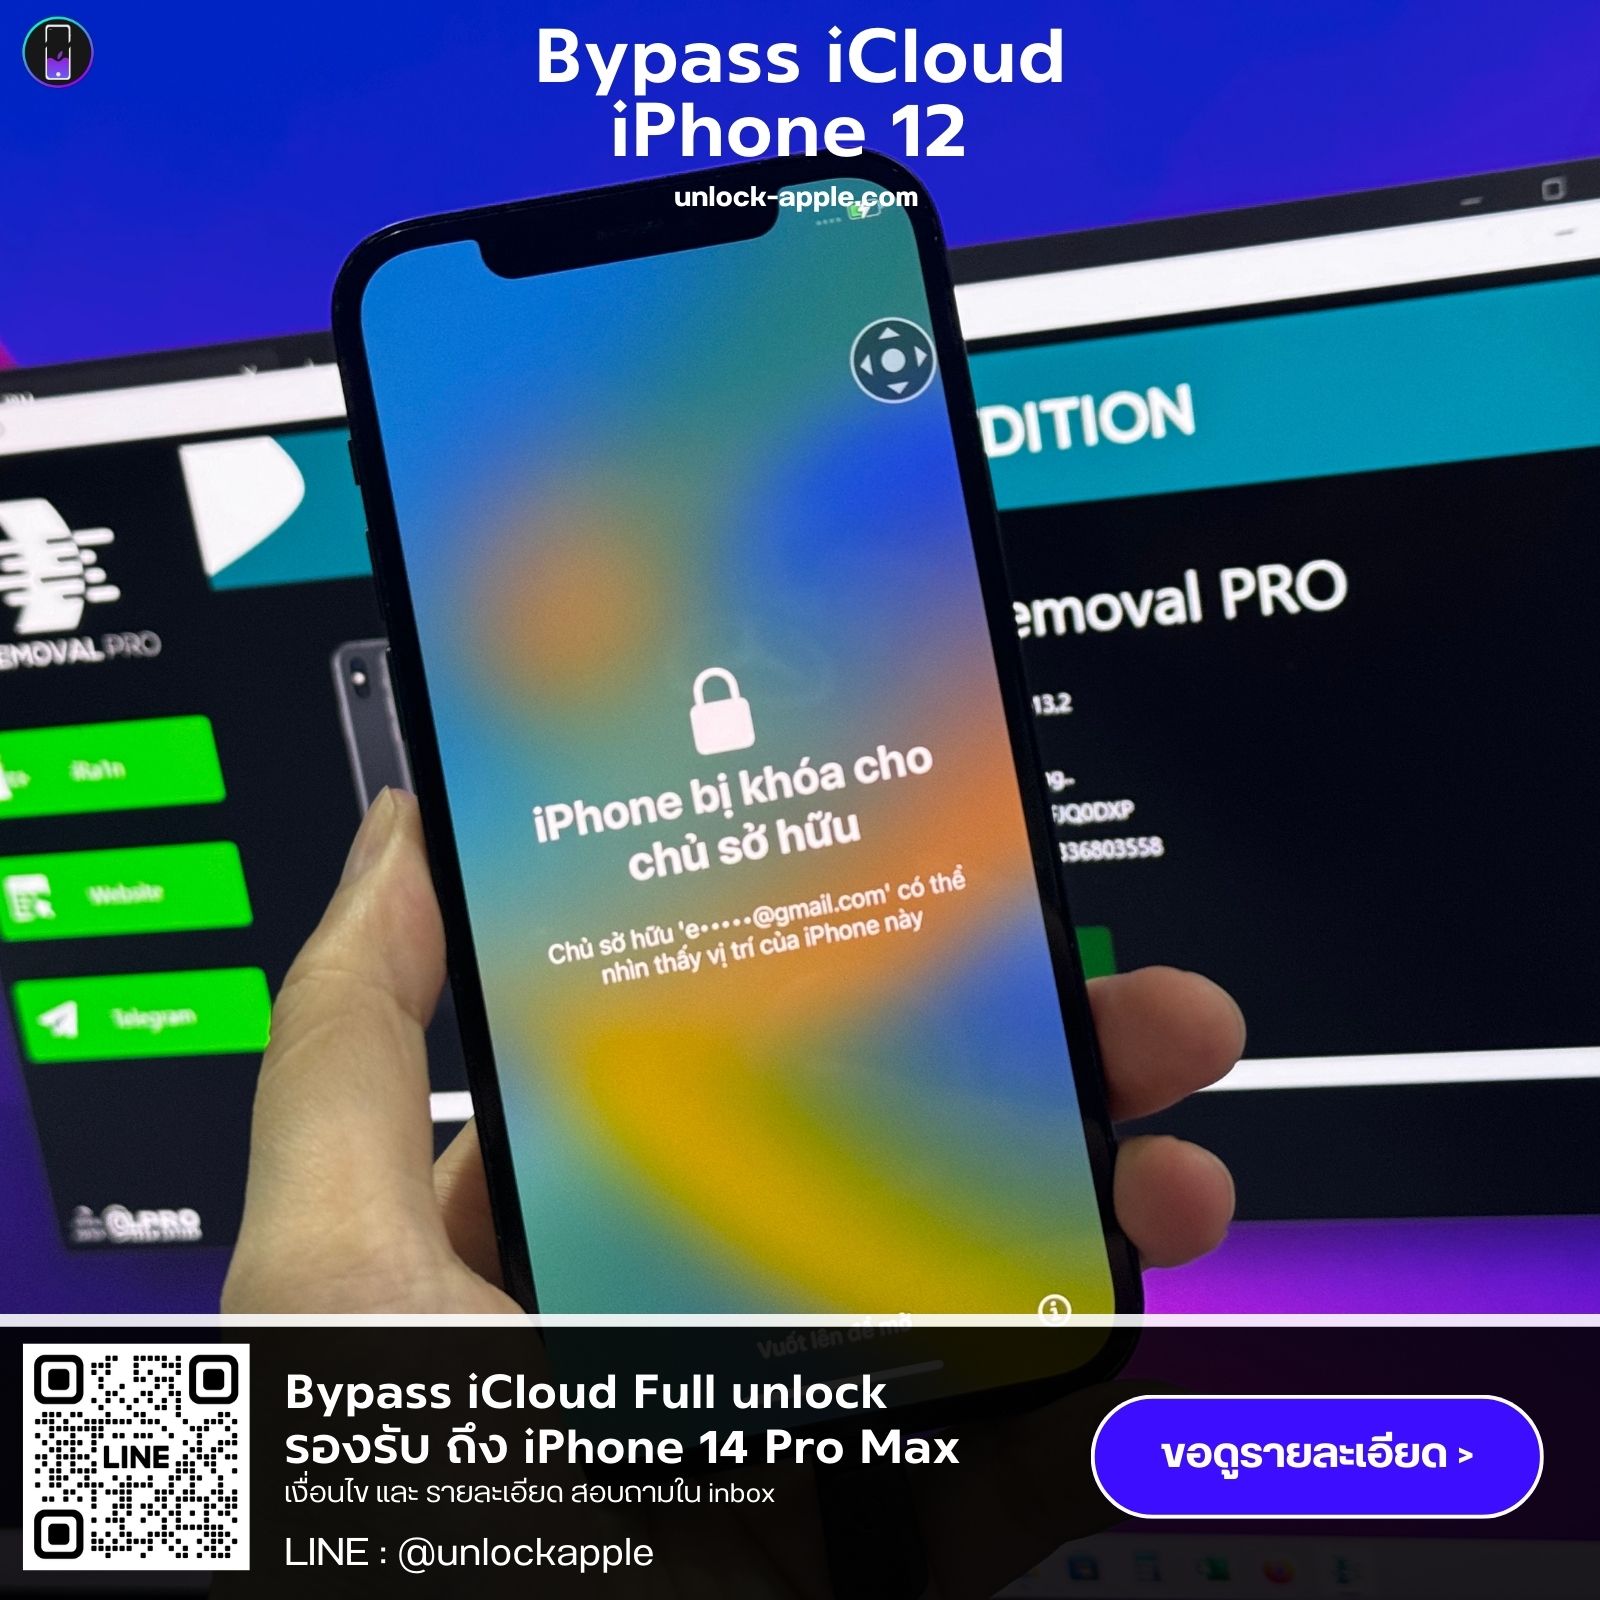 Bypass iCloud iPhone 12 -1